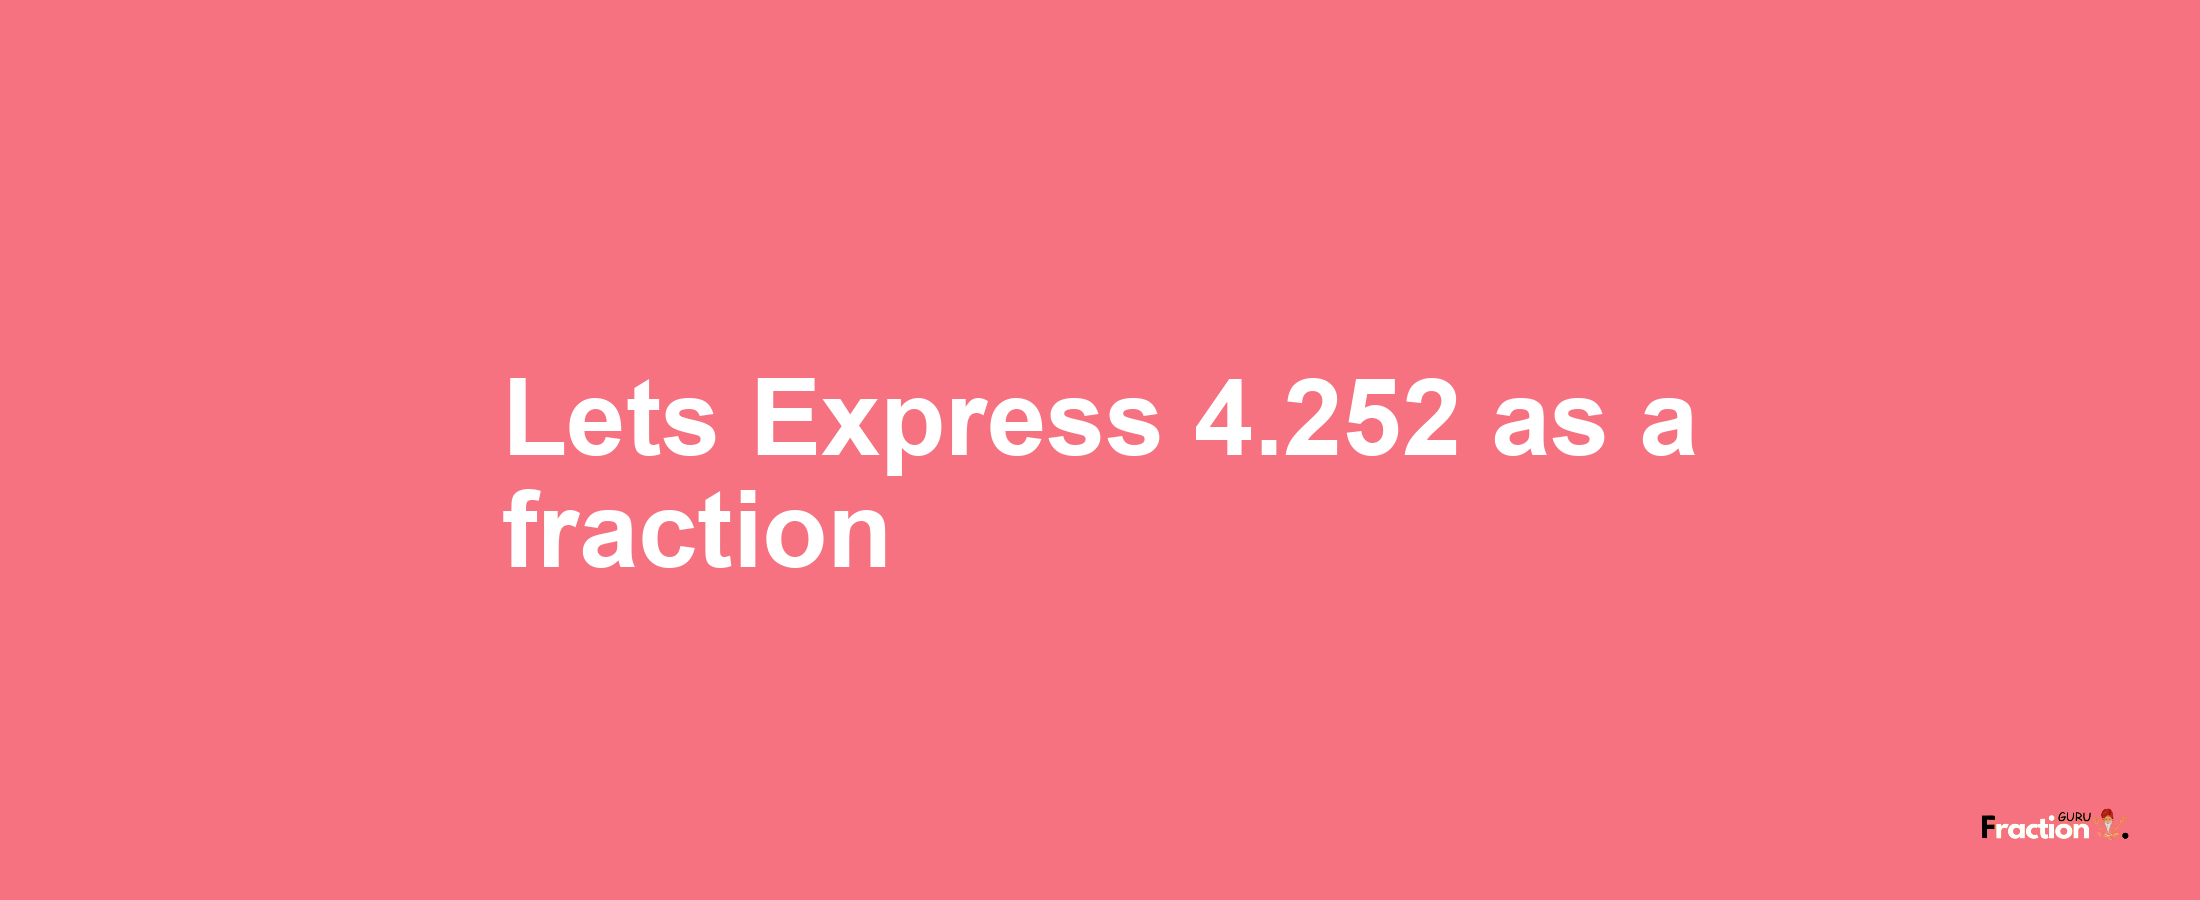 Lets Express 4.252 as afraction